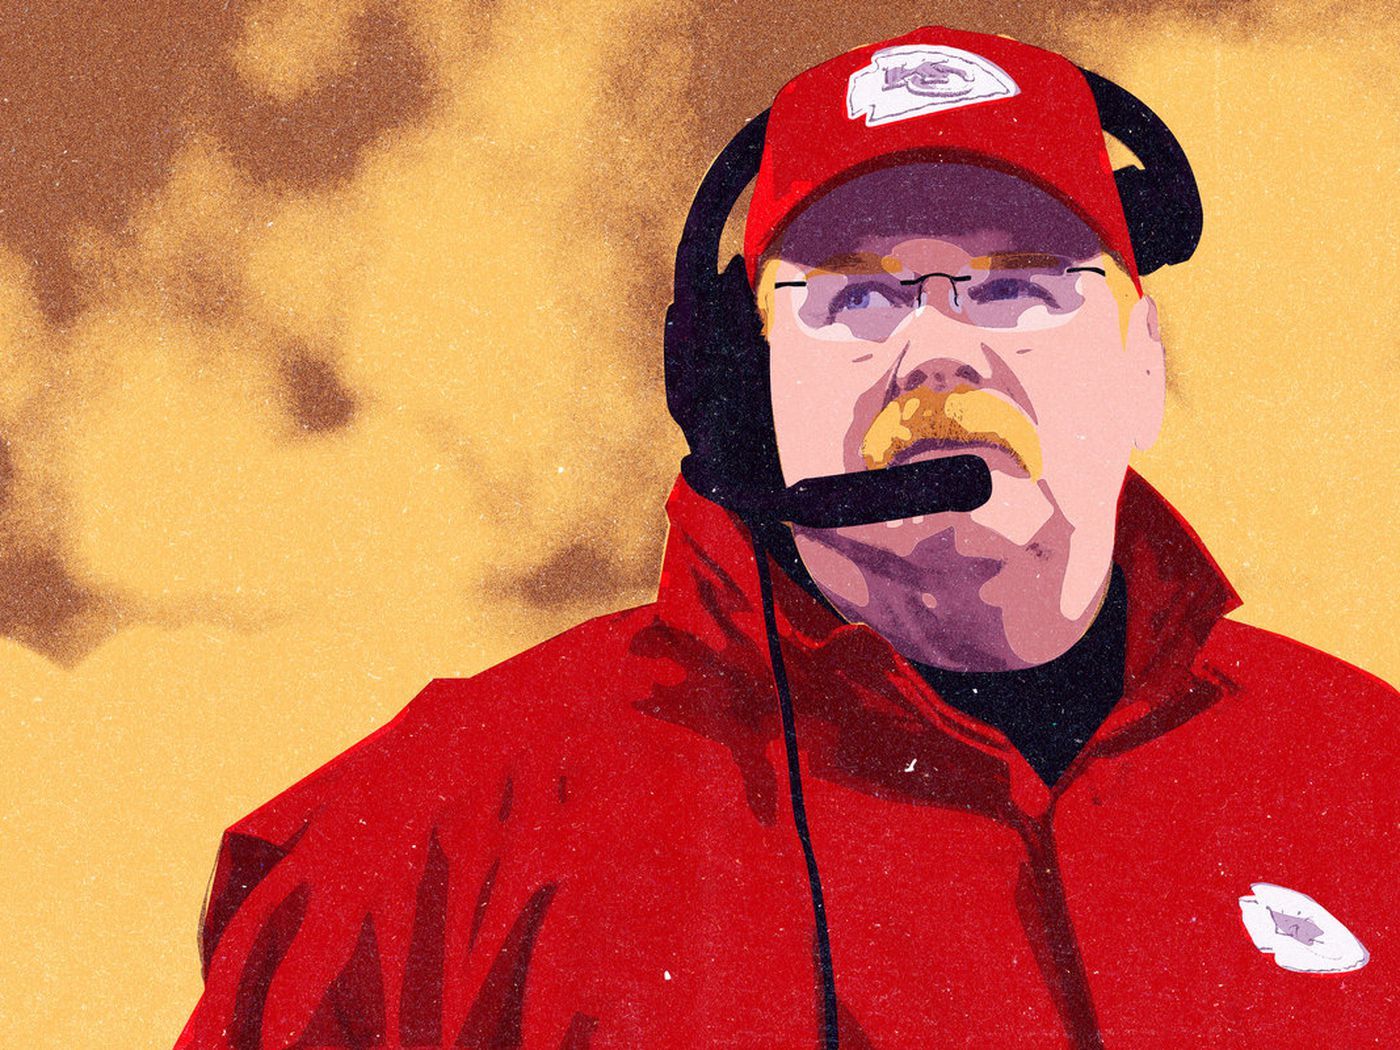 Andy Reid Stretched the Limits of Offensive Innovation to a Super Bowl